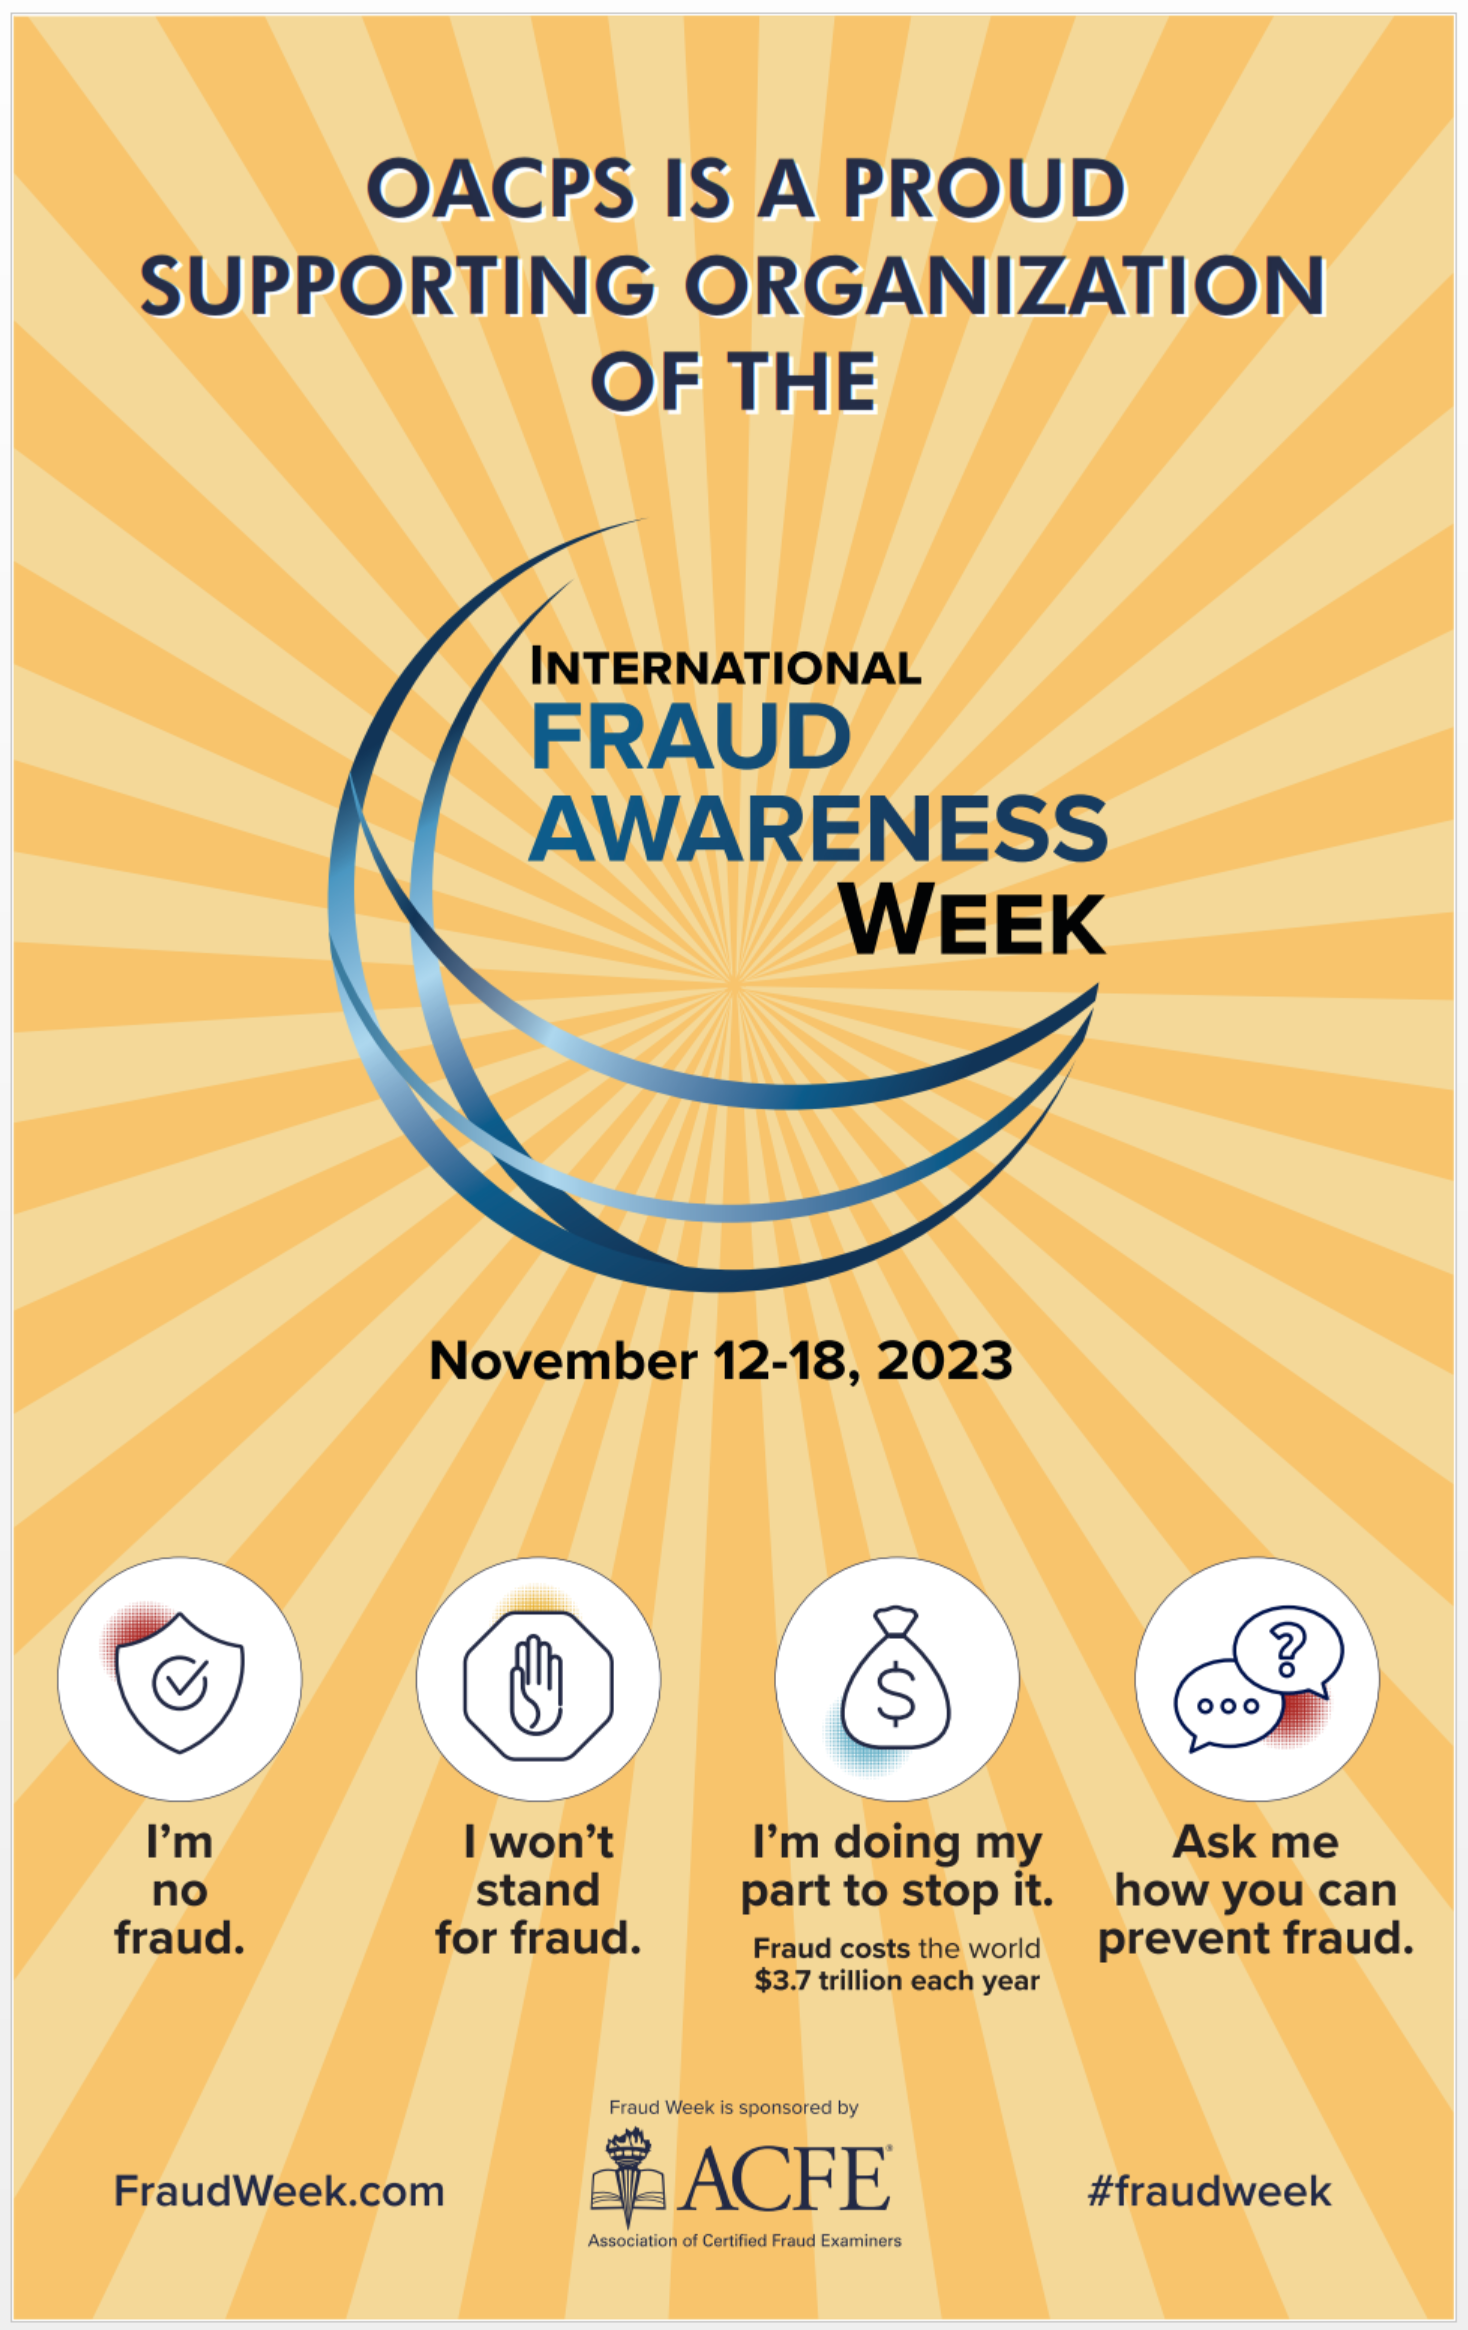 Statement by the Secretary General of the OACPS on International Fraud Awareness Week.